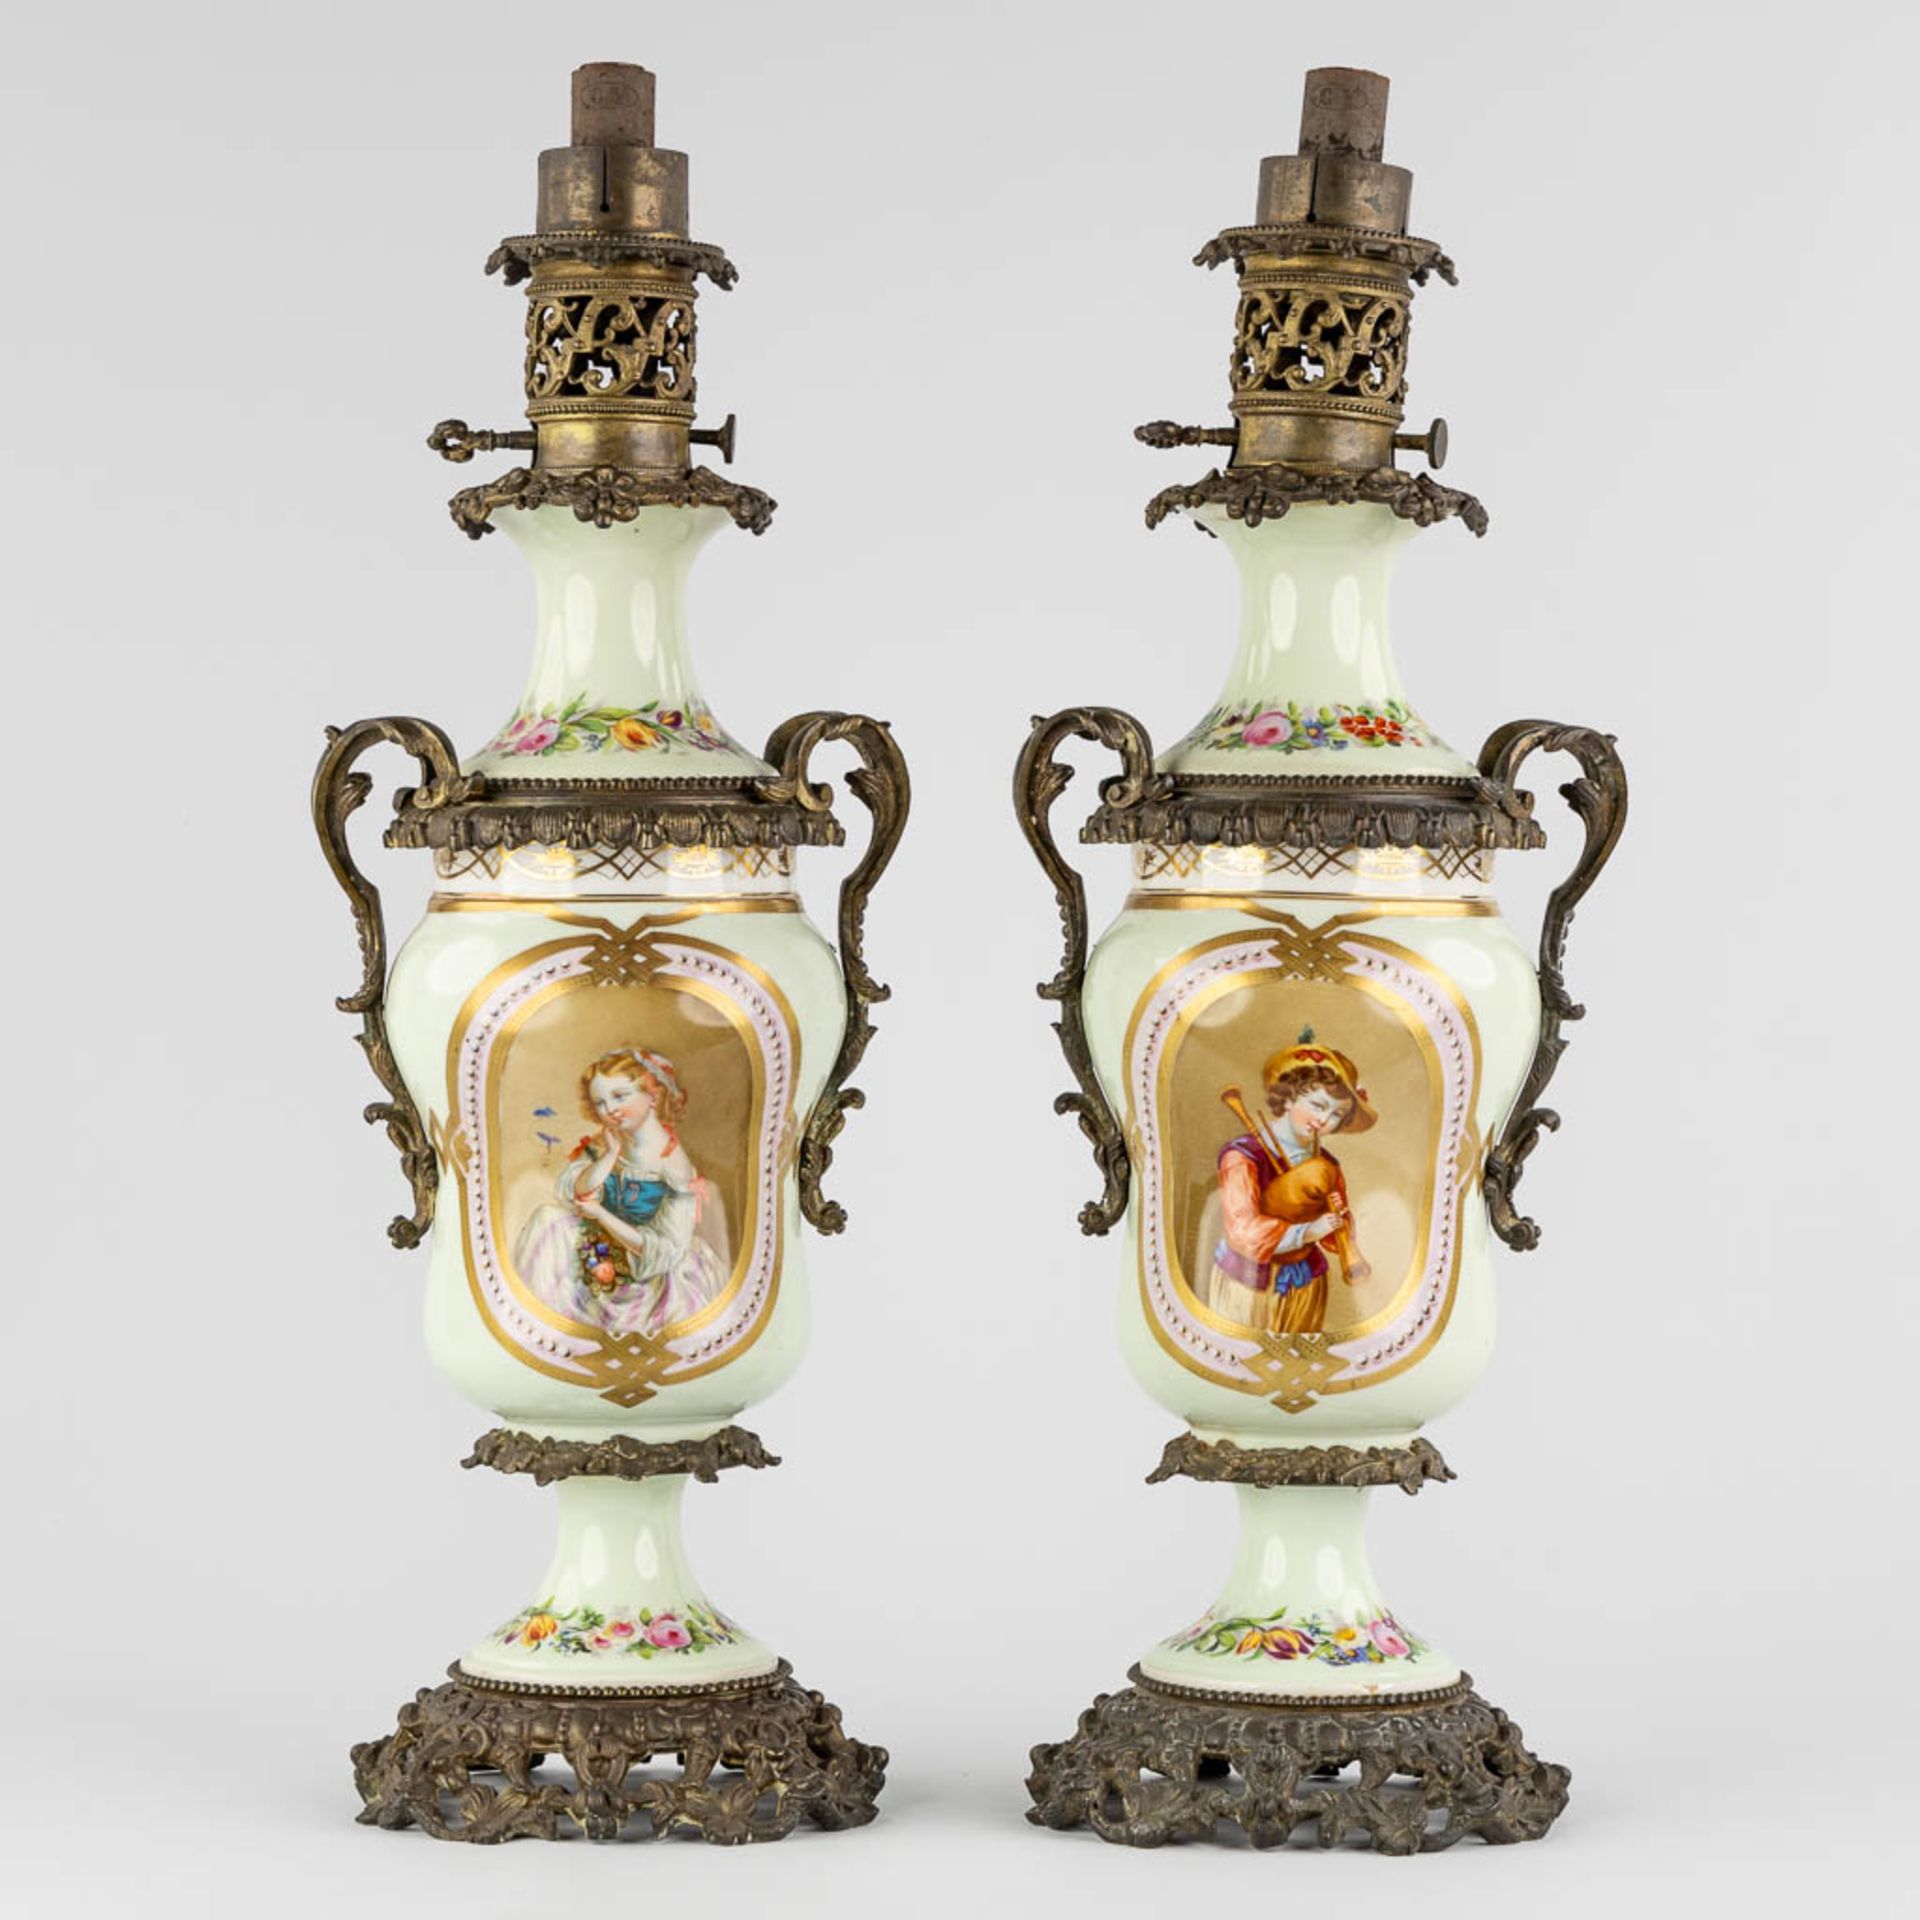 A pair of oil lamps with hand-painted decors, mounted with bronze. 19th C. (L:18 x W:20 x H:57 cm)